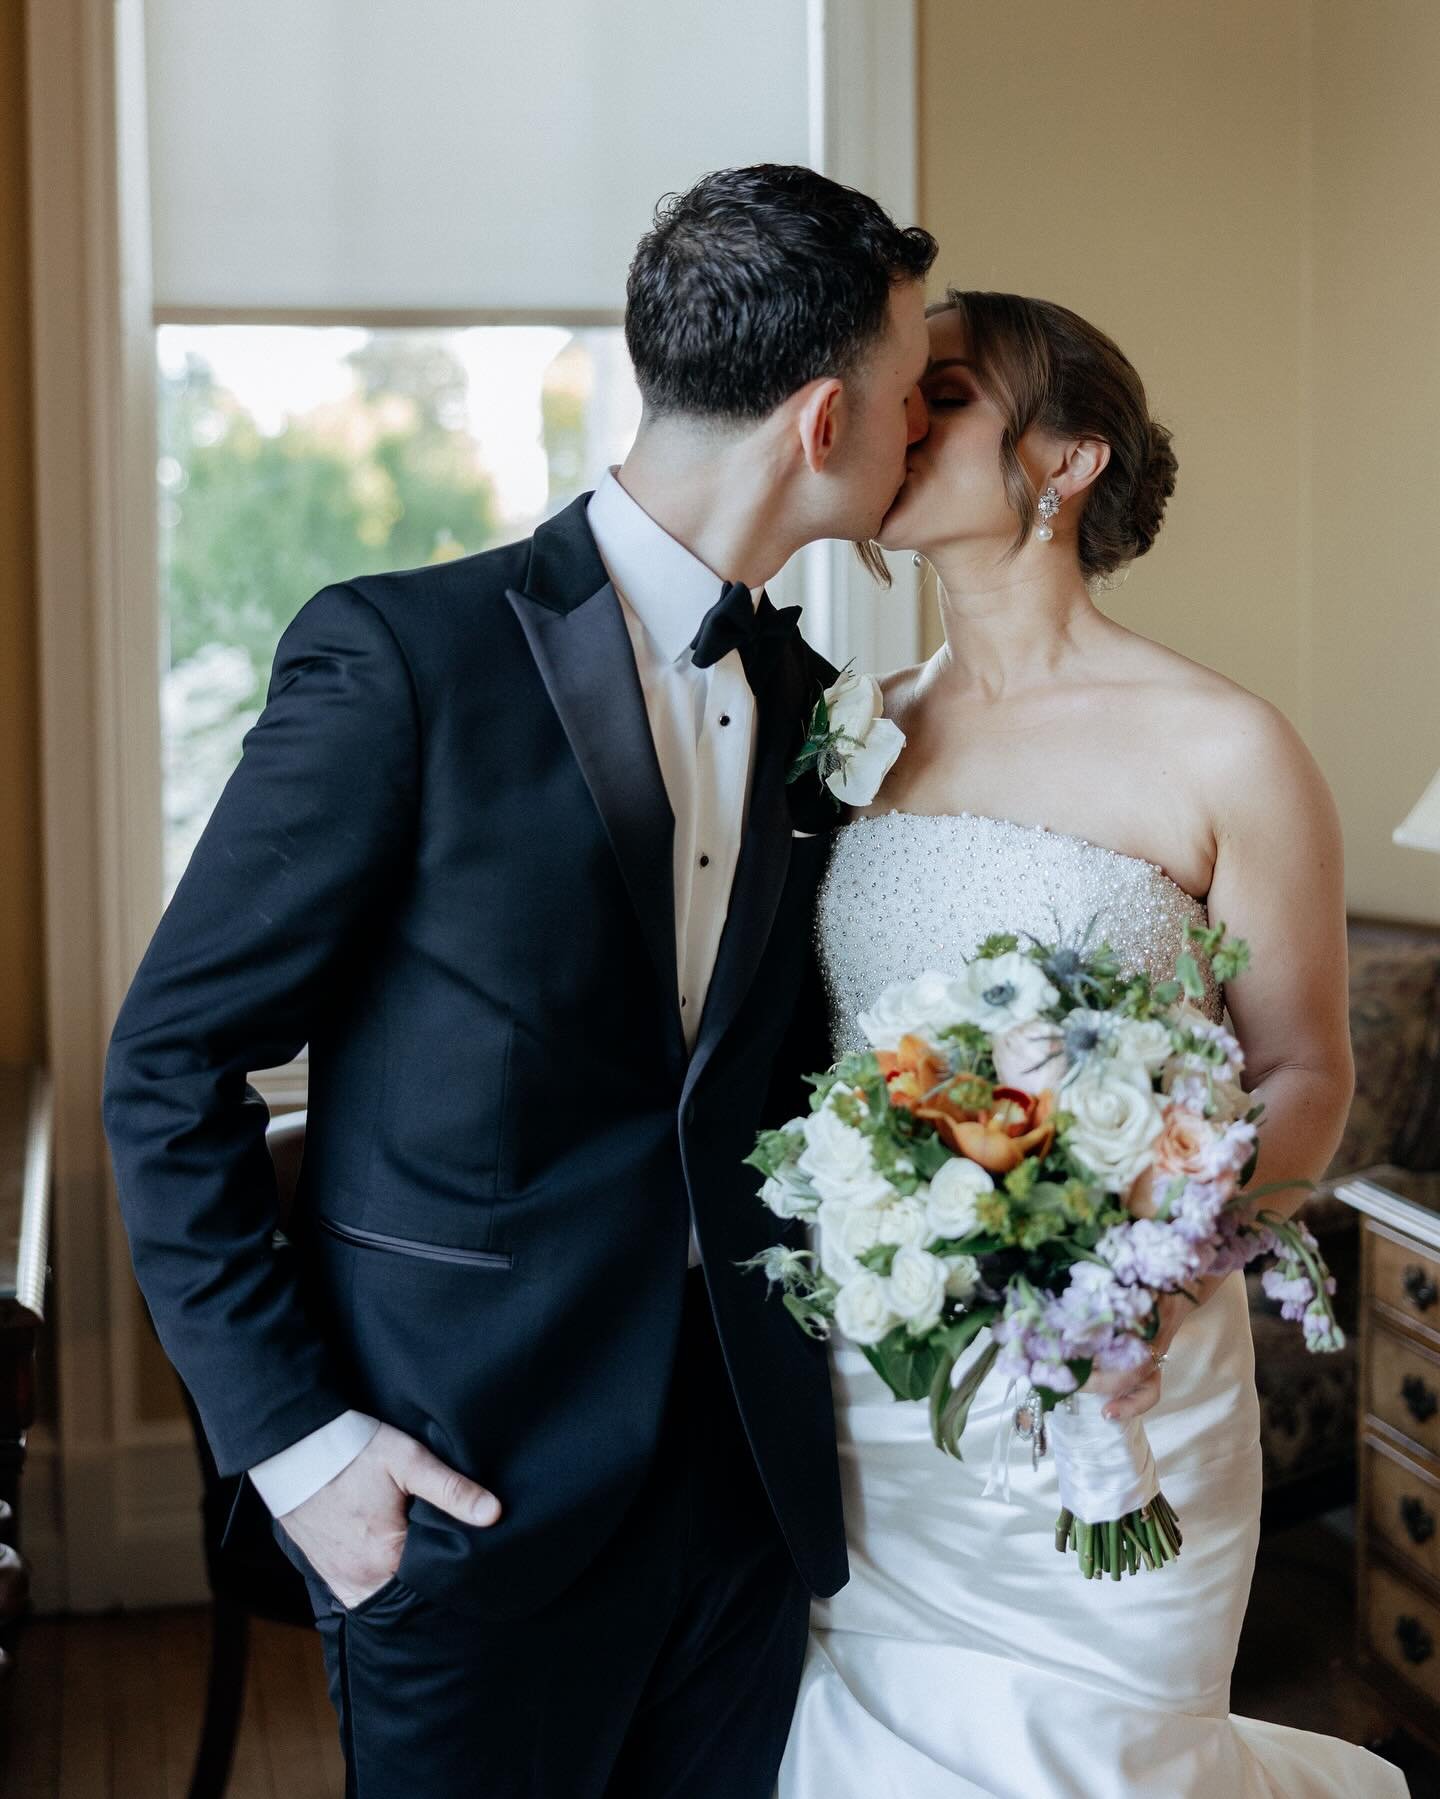 We met Anna last year when she was a bridesmaid in a wedding we captured - and her &amp; John brought us back last month for their wedding. It is such a compliment when a bridal party member or guest from a previous wedding hires us, and we are just 